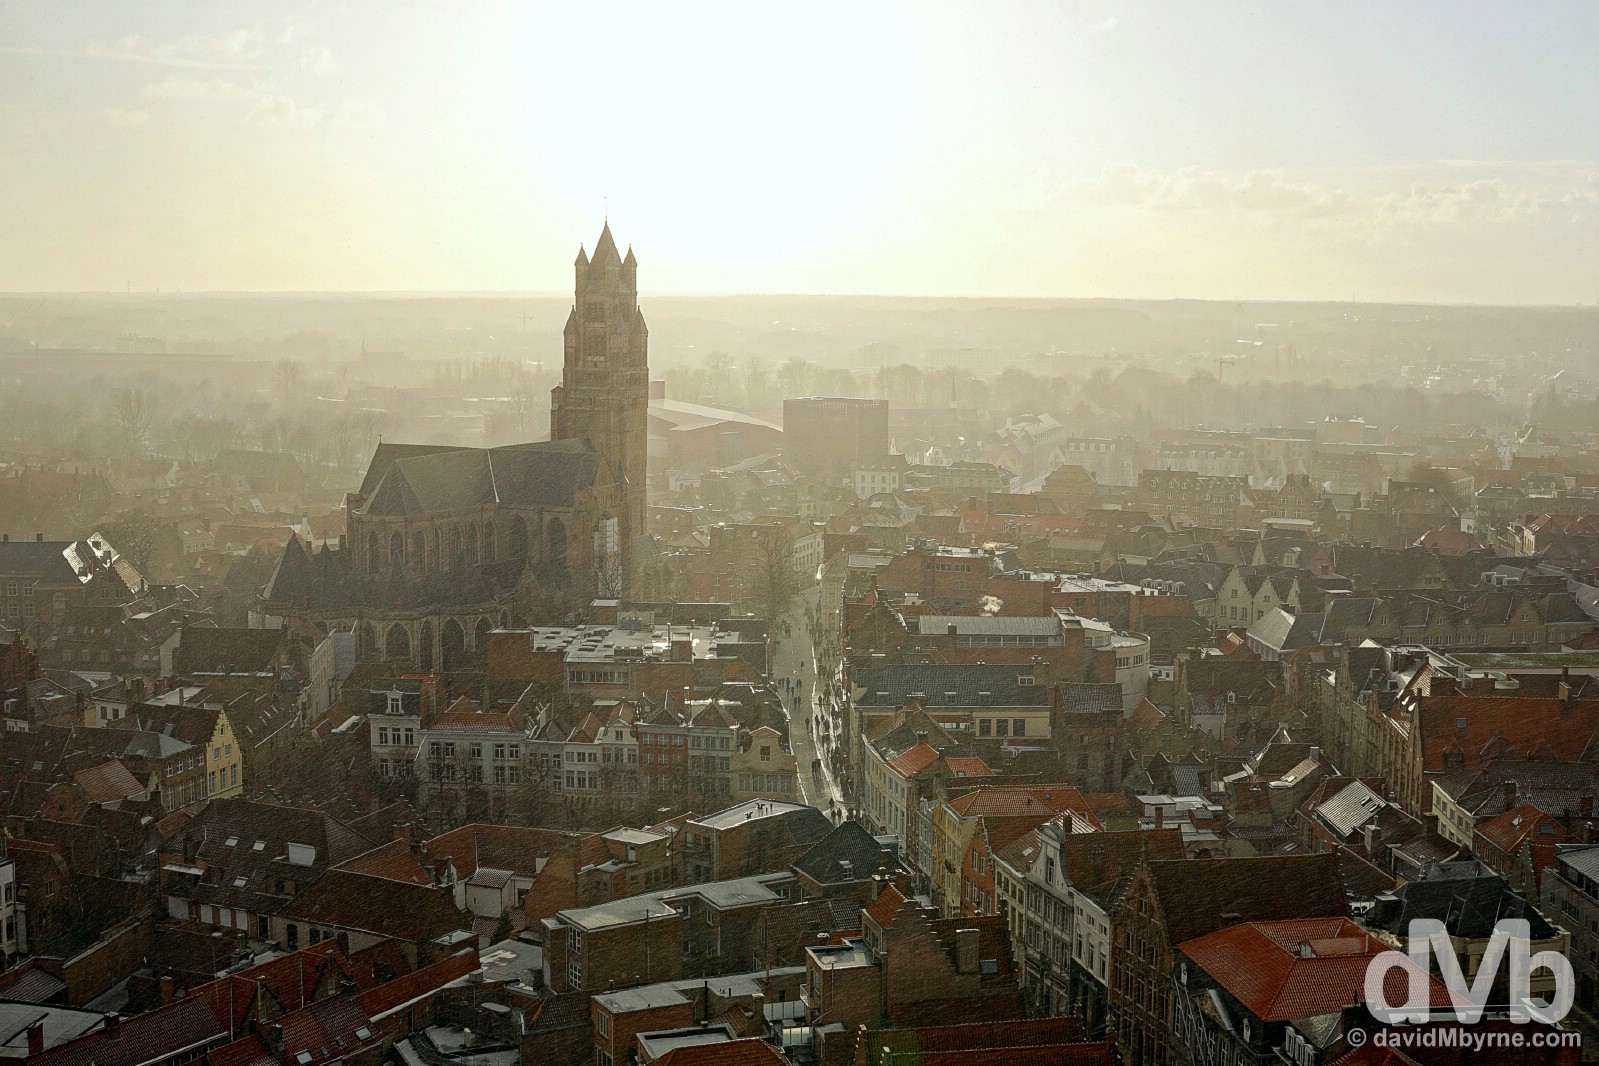 St Salvatorskathedraal and western Bruges during a late afternoon hail shower as seen from the city's Belfort. Bruges, western Flanders, Belgium. January 16, 2015. 